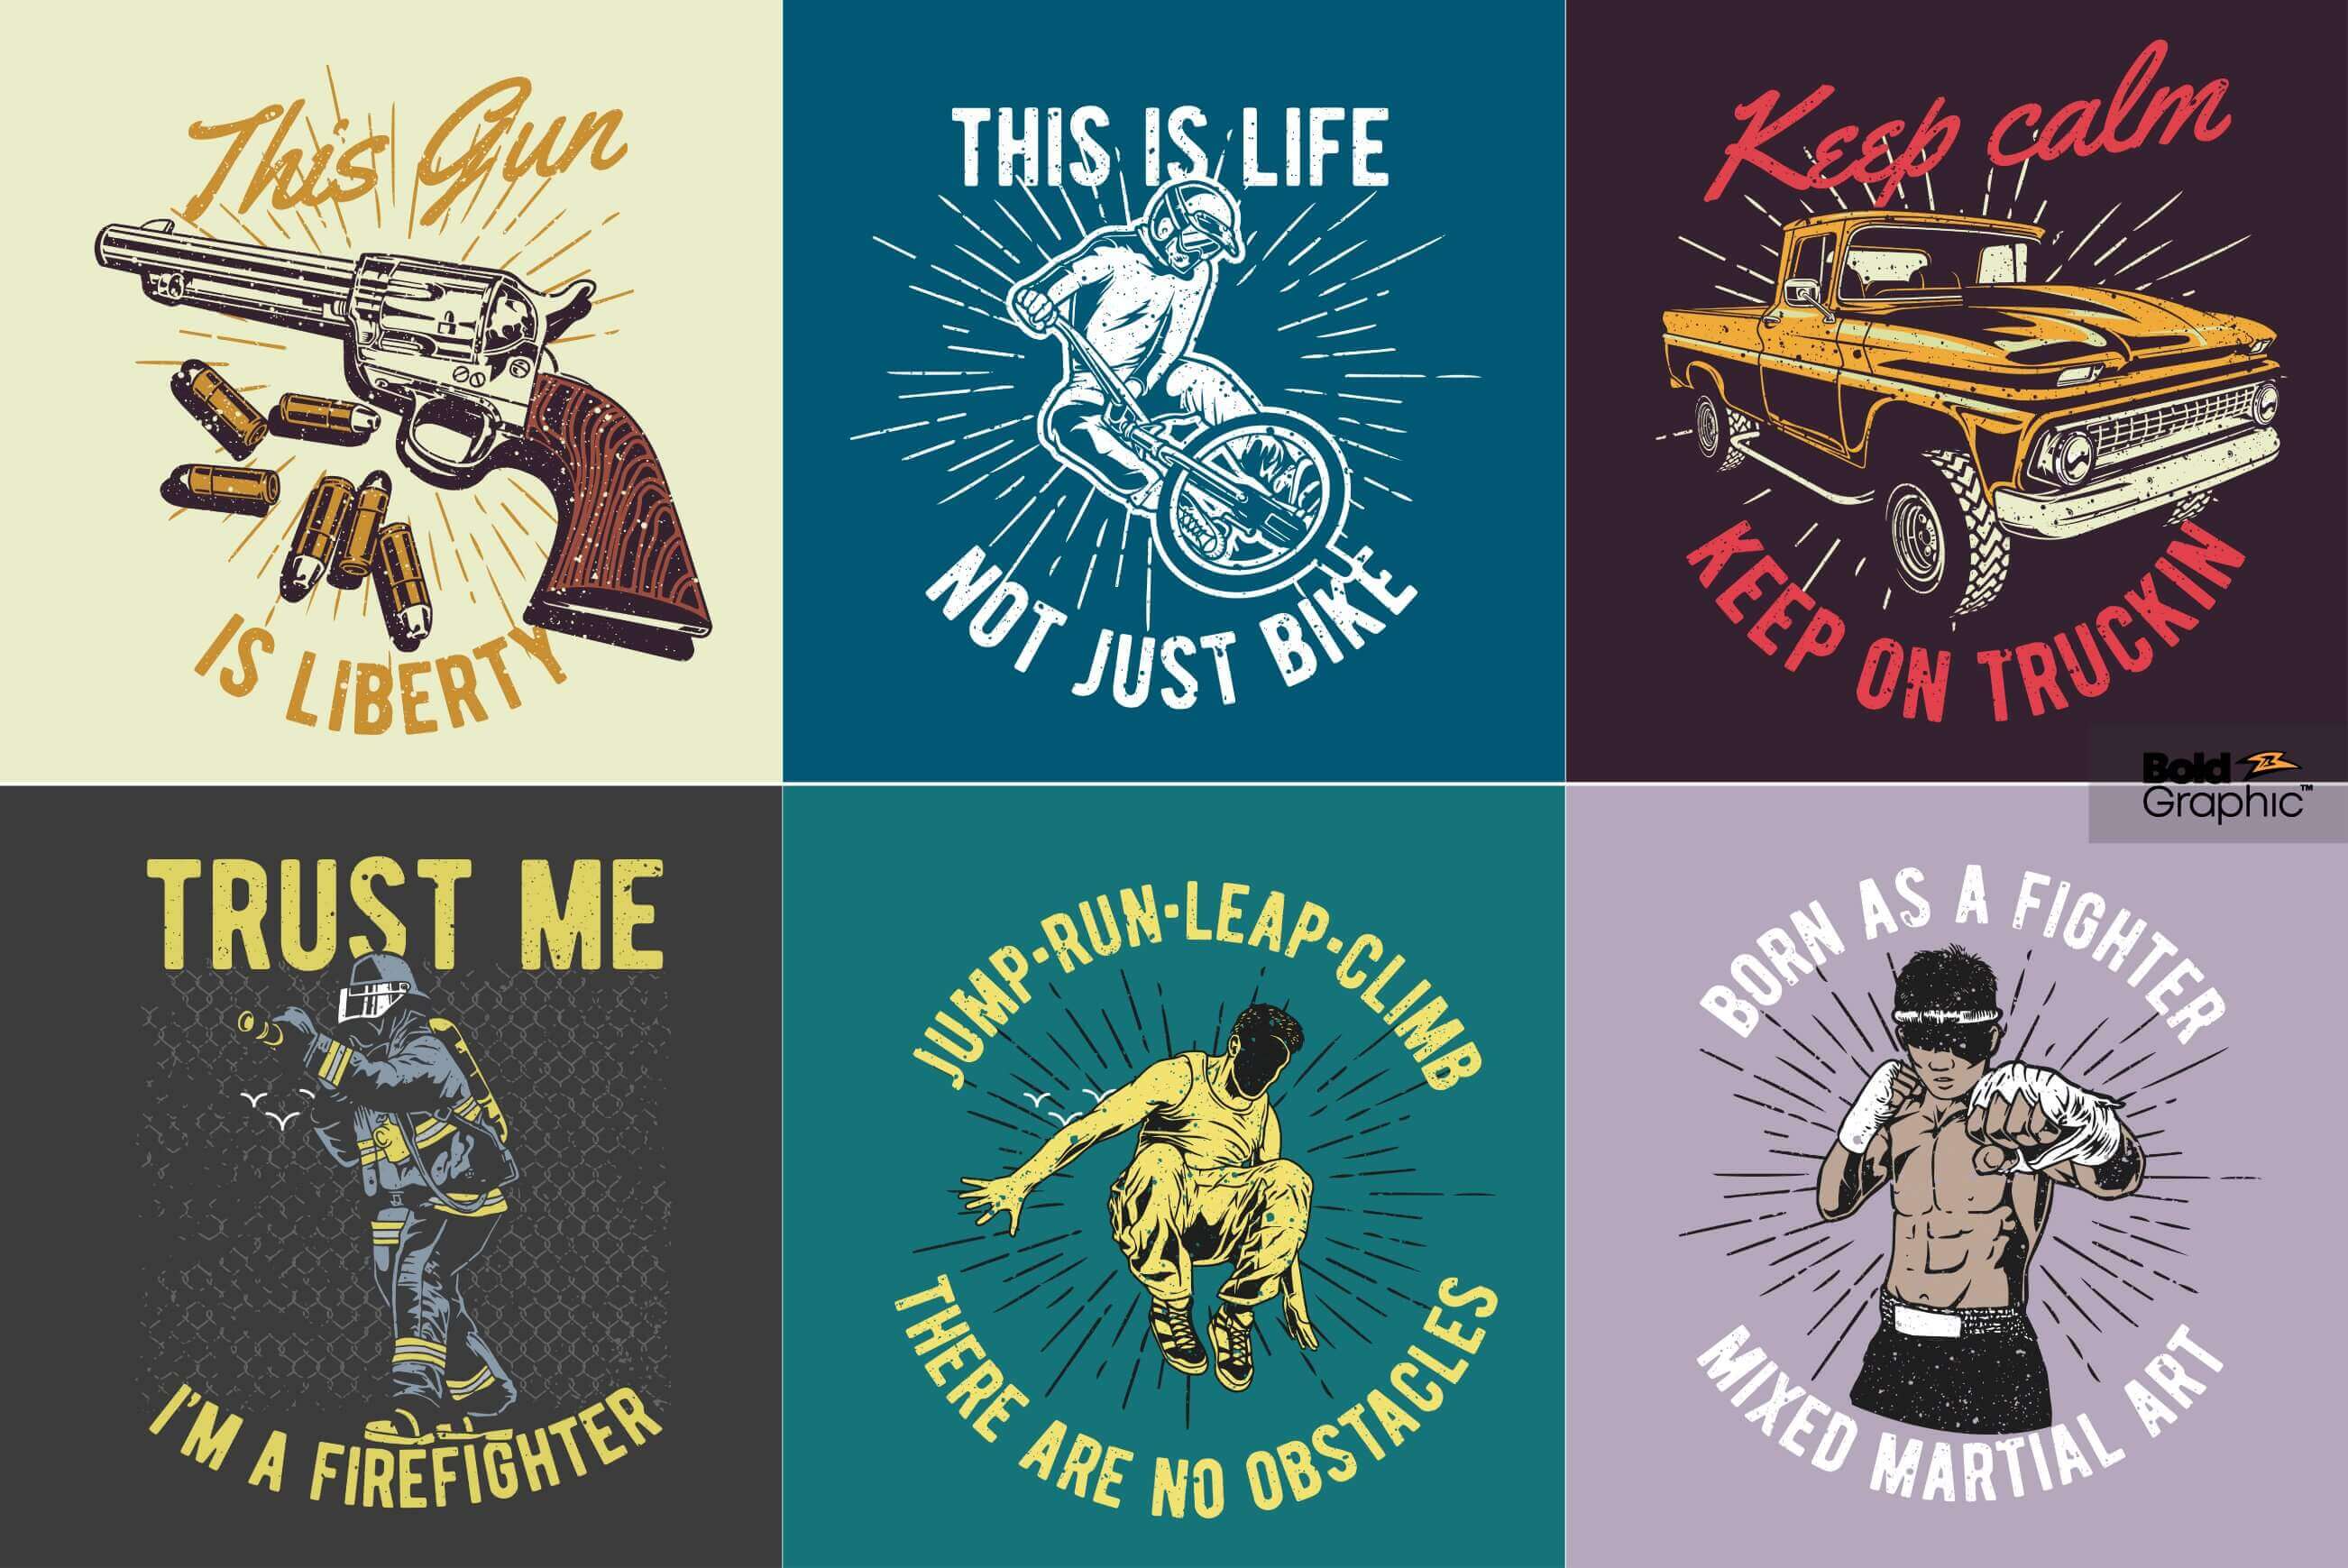 T-shirt designs depicting working specialties and sports hobbies.